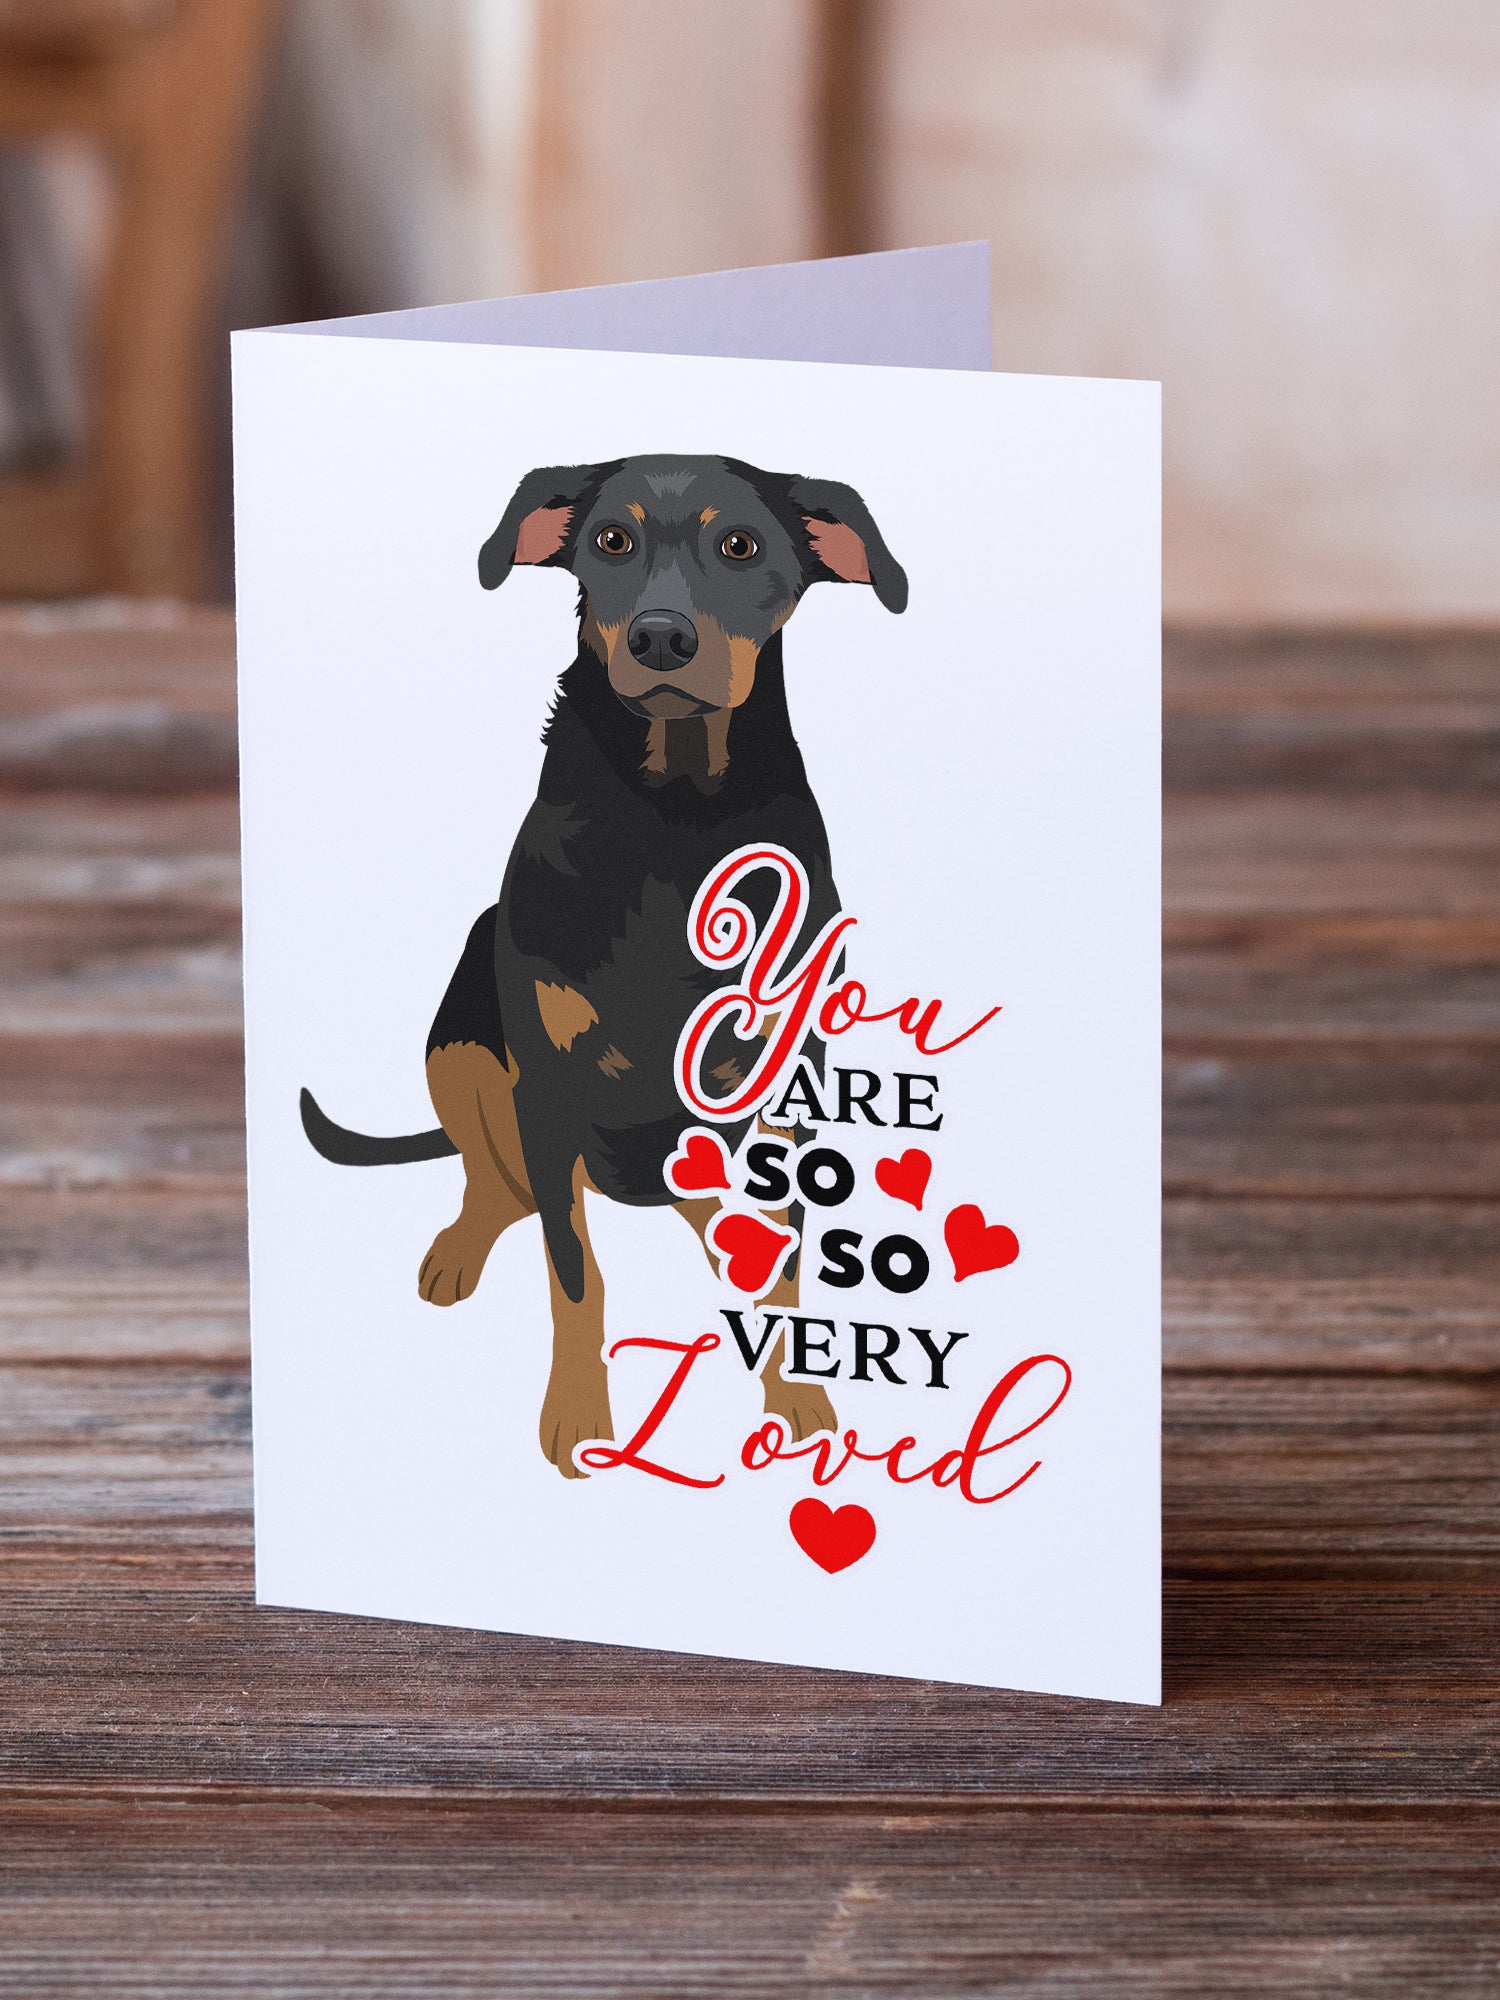 Buy this Rottweiler Black and Tan #5 so Loved Greeting Cards and Envelopes Pack of 8